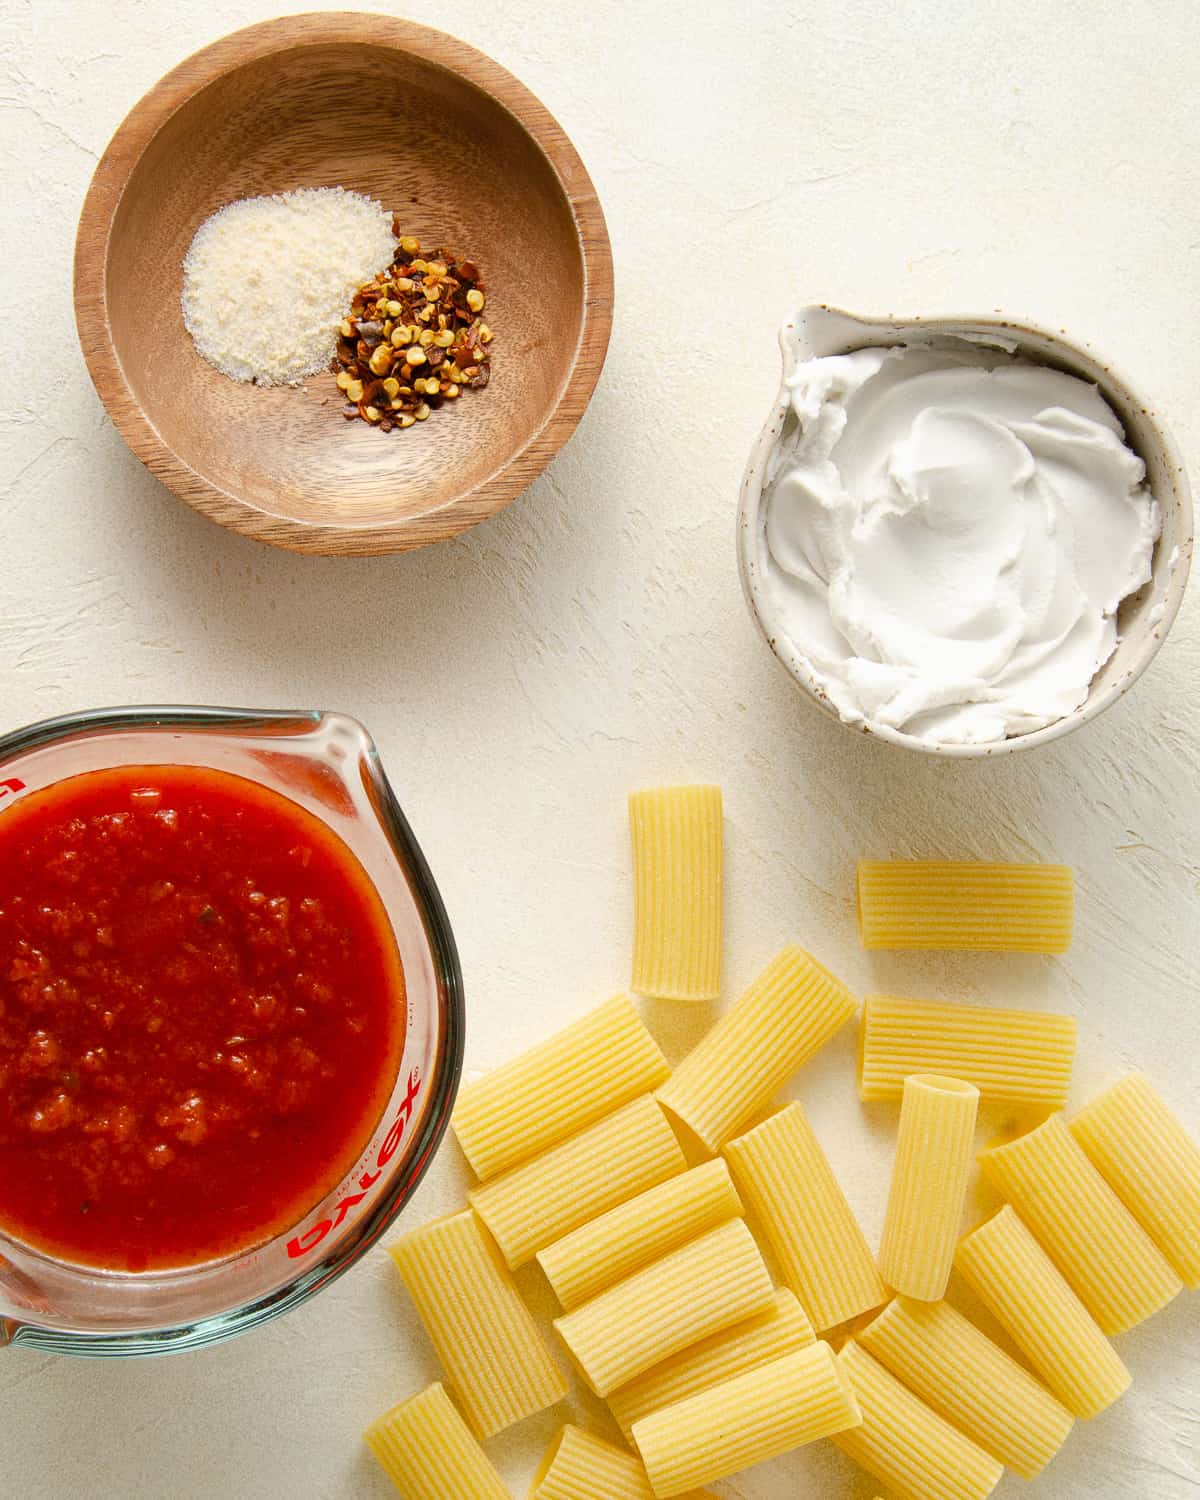 Ingredients needed for dairy free pink pasta sauce: garlic salt, red pepper flakes, marinara sauce, coconut cream, and pasta.